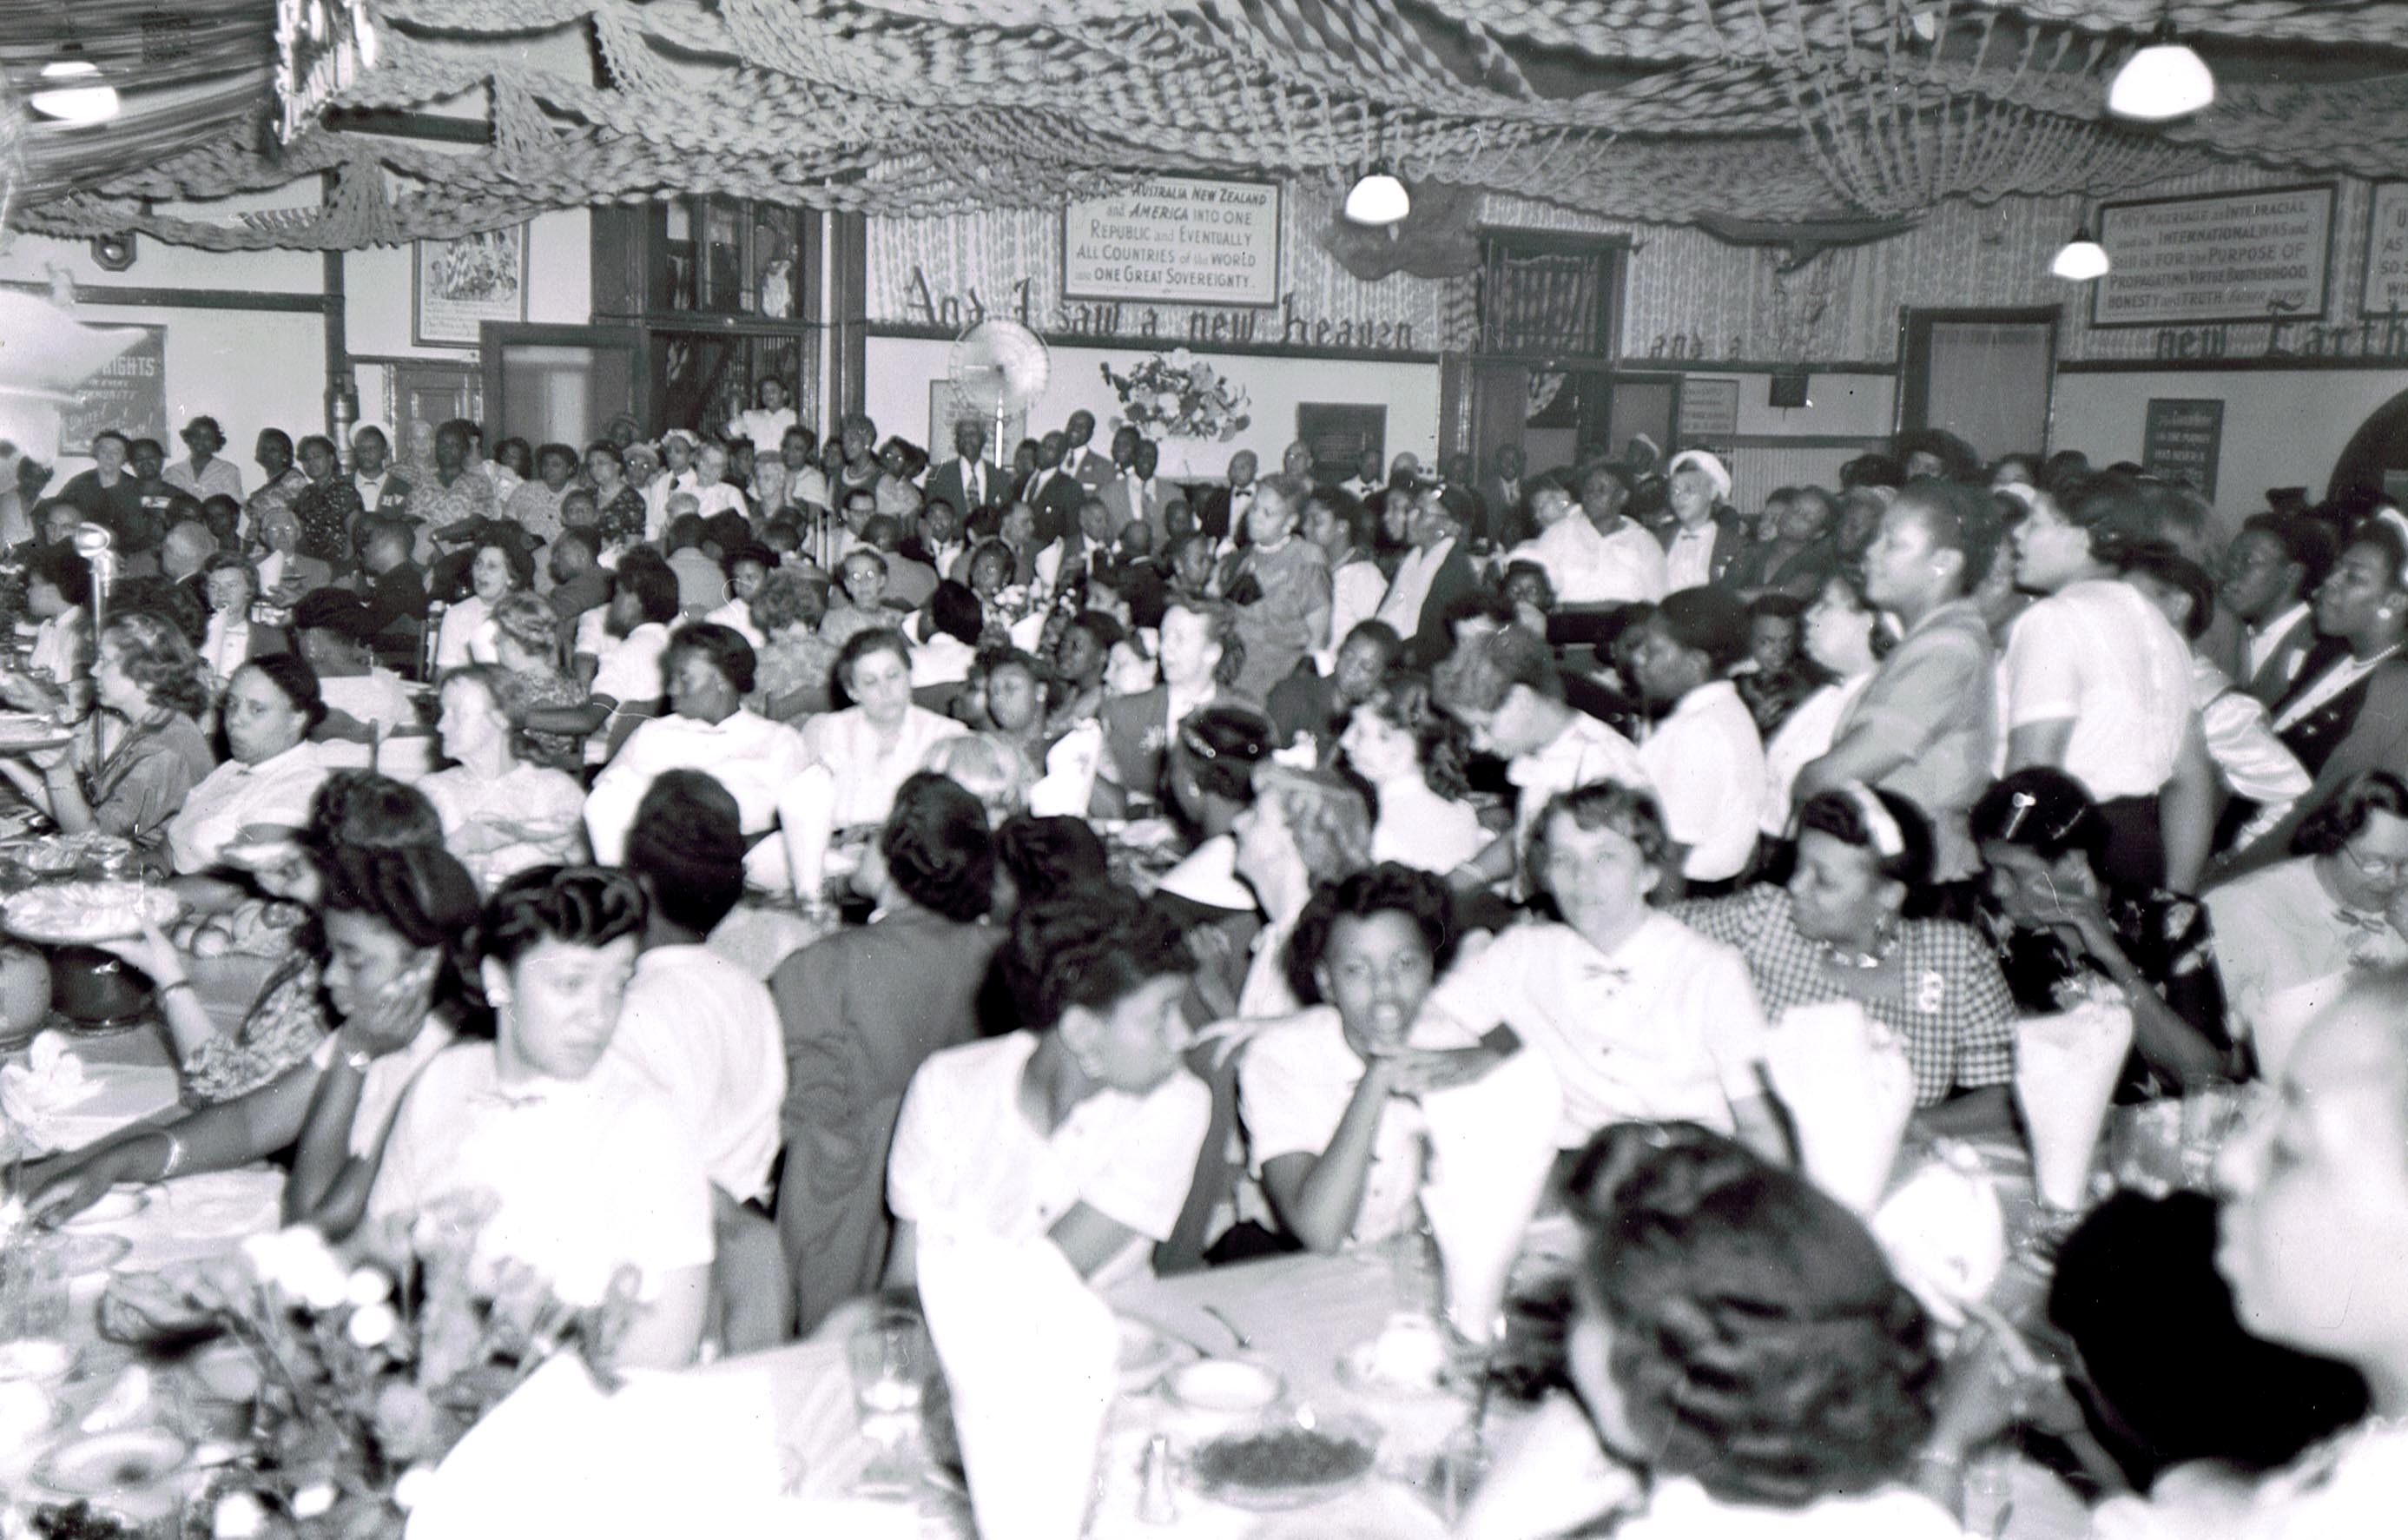 Children being served at the banquet tableof The Unity Mission Church, Home and Training School.